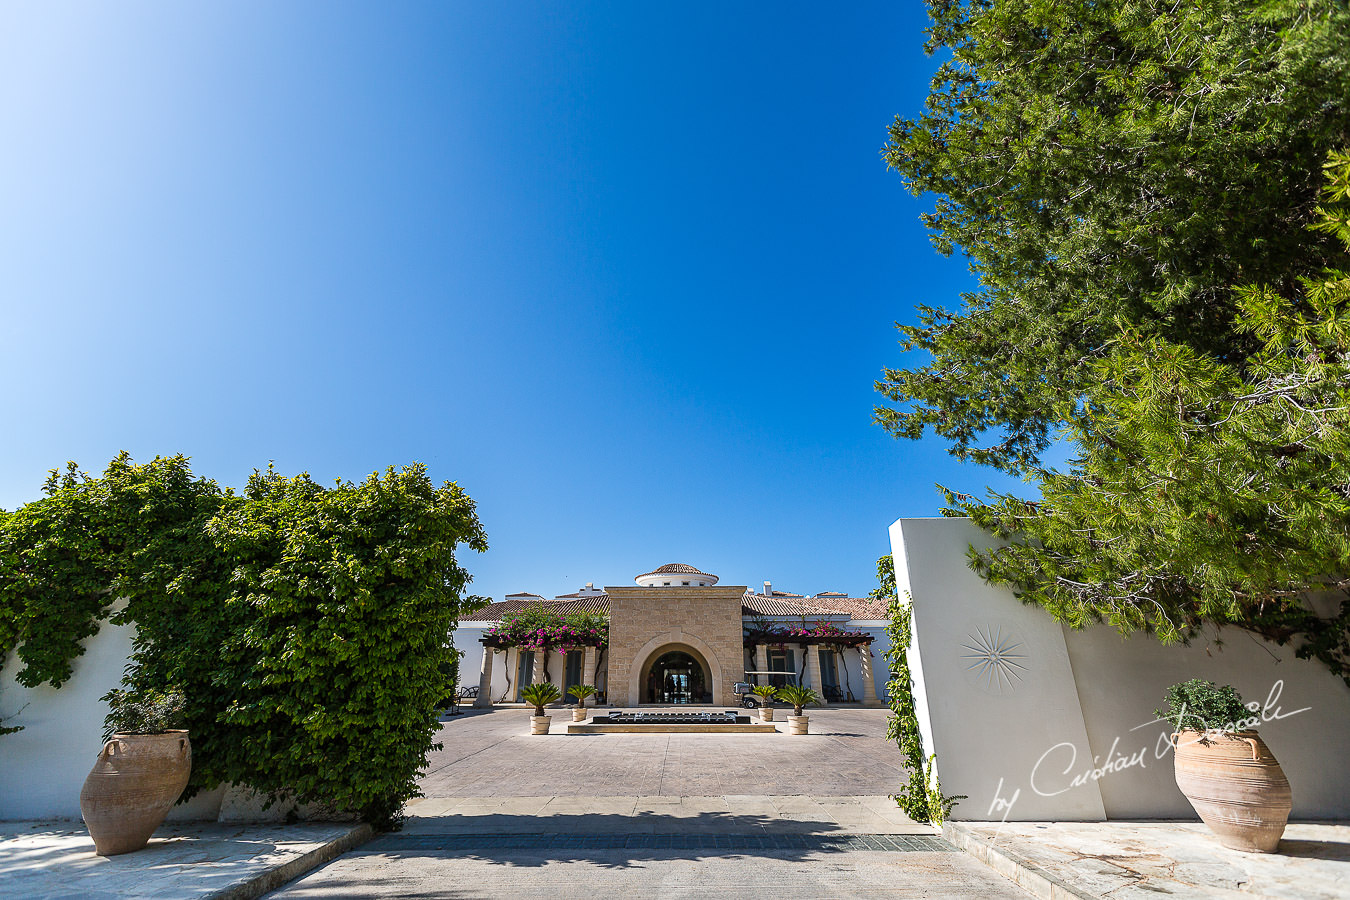 The entrance of the beautiful Anassa Hotel photographed by Cyprus Photographer Cristian Dascalu.